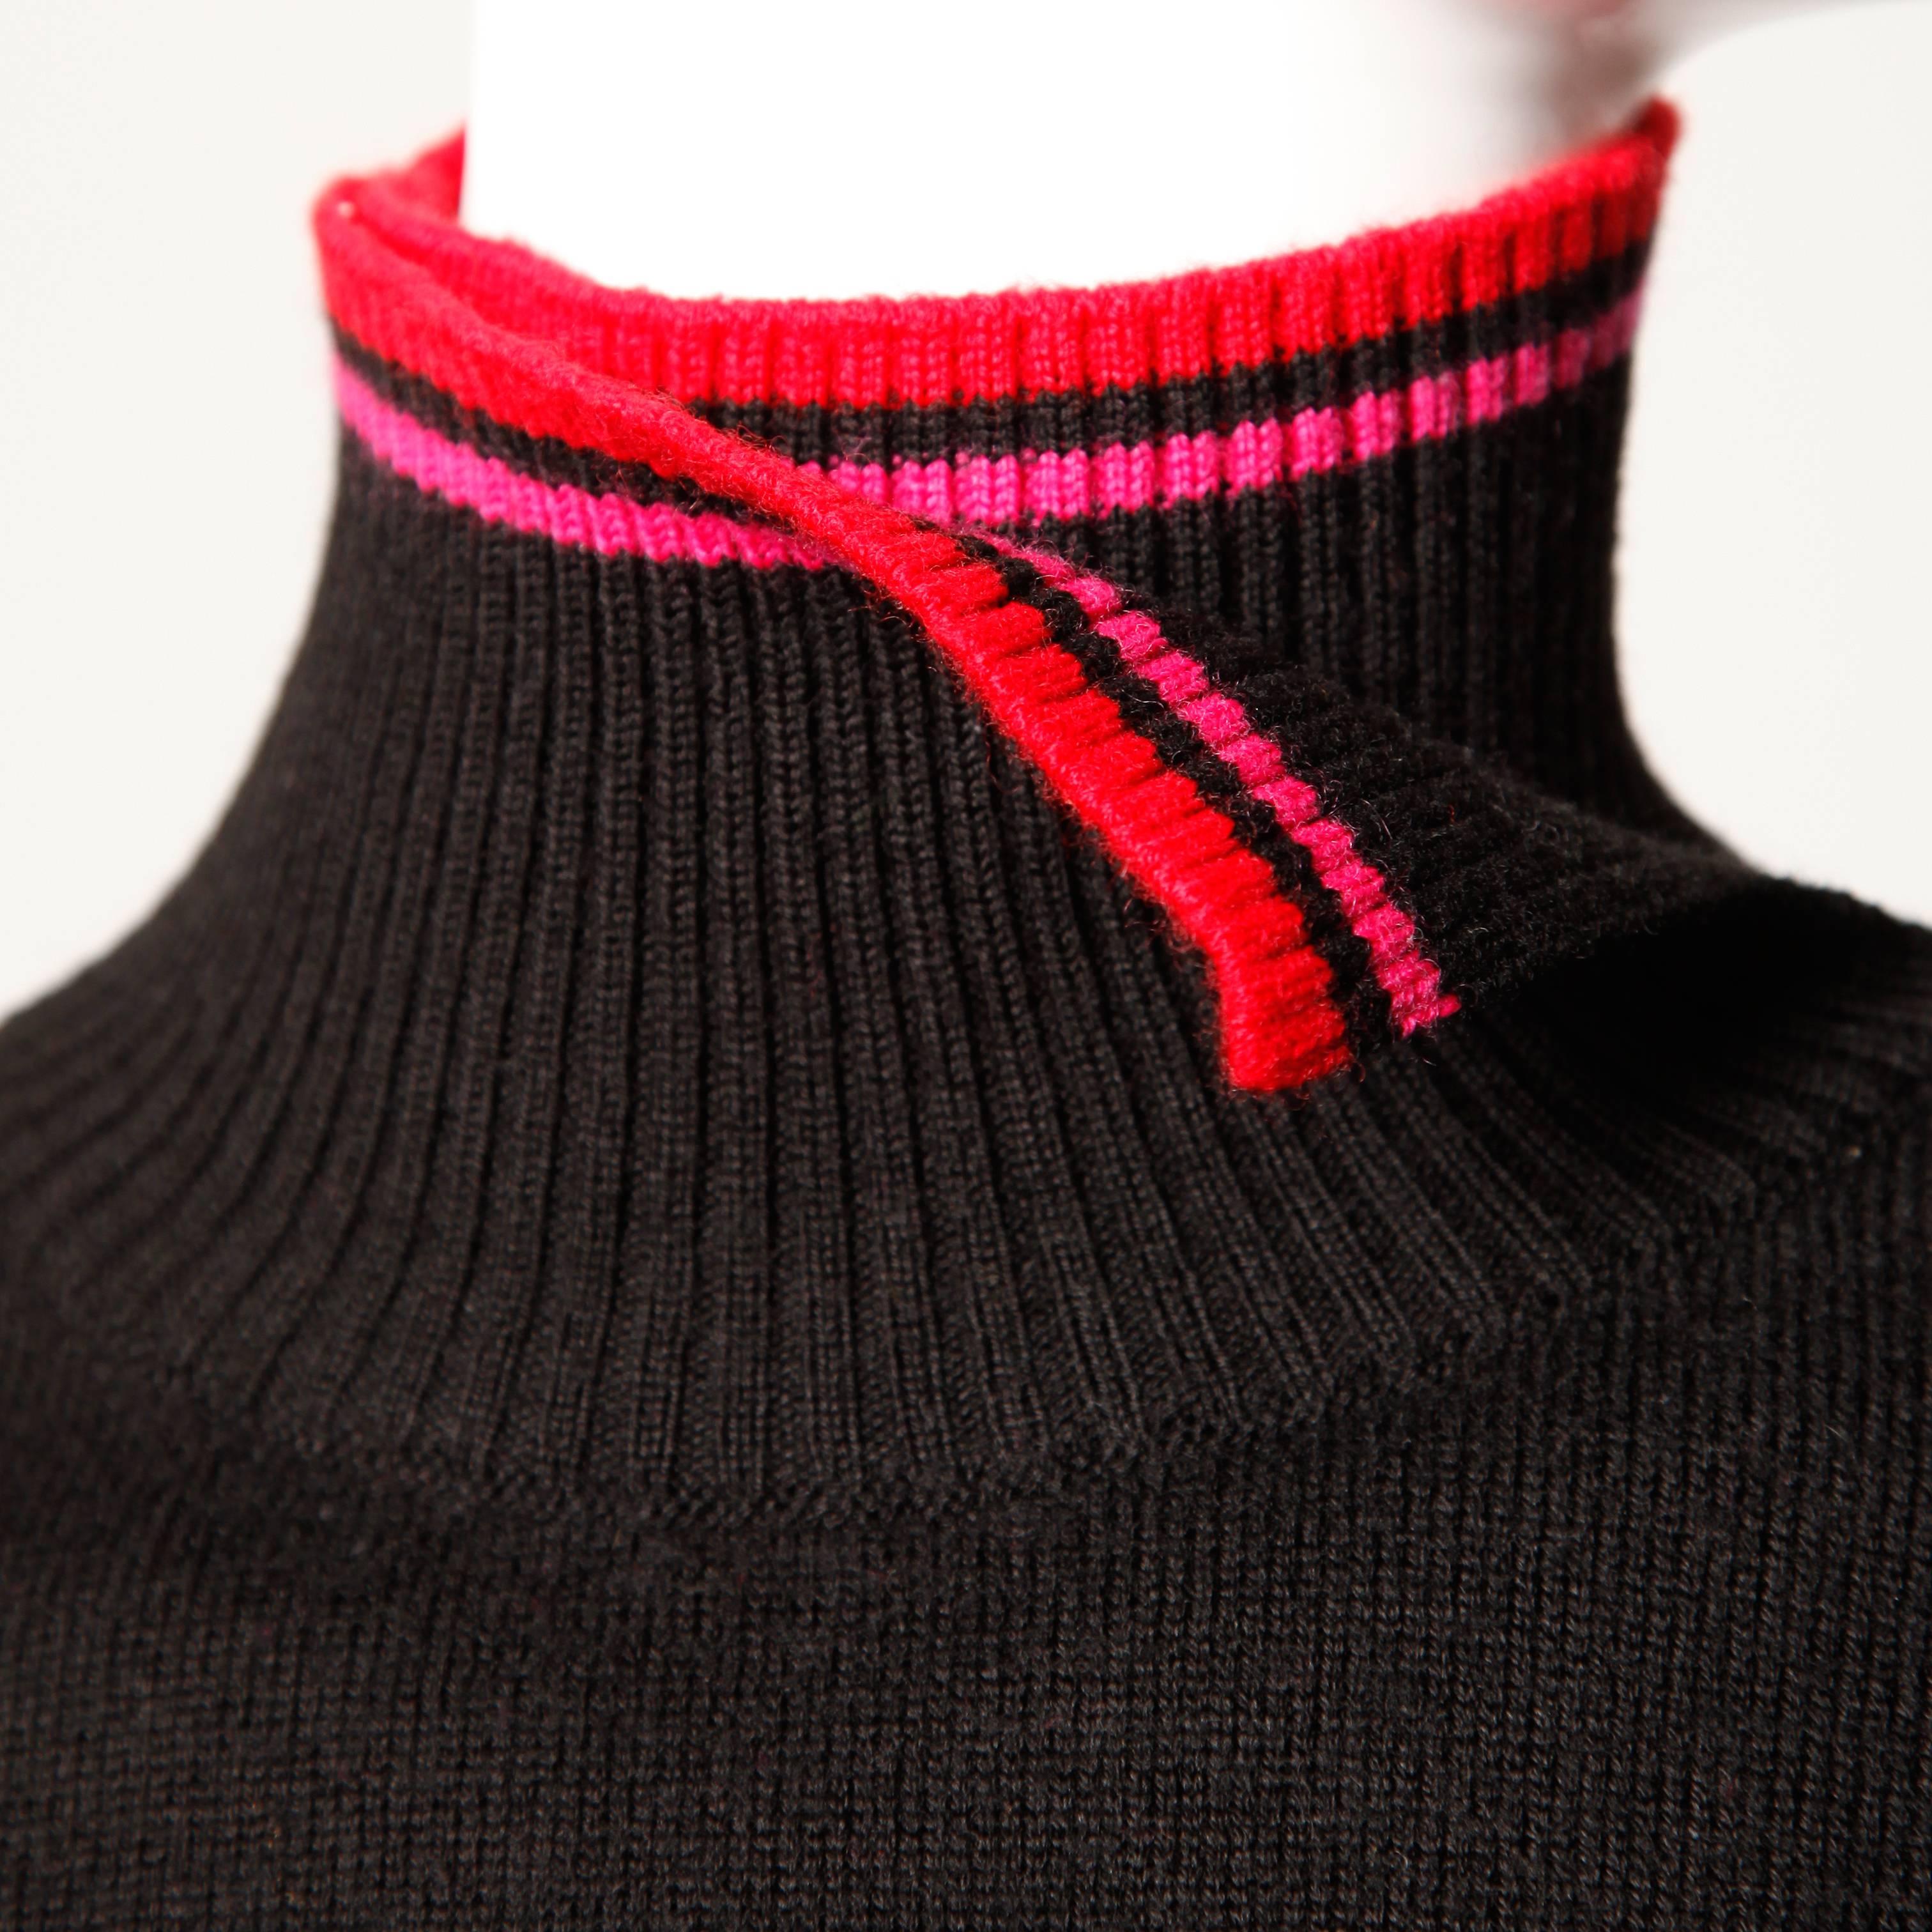 Details: 

Unlined
Estimated Size: Small
Color: Black/ Red and Pink Detail
Fabric: 50% Merino Wool/ 50% Acrylic
Label: Christian Lacroix Bazar

Measurements:

Bust: 36